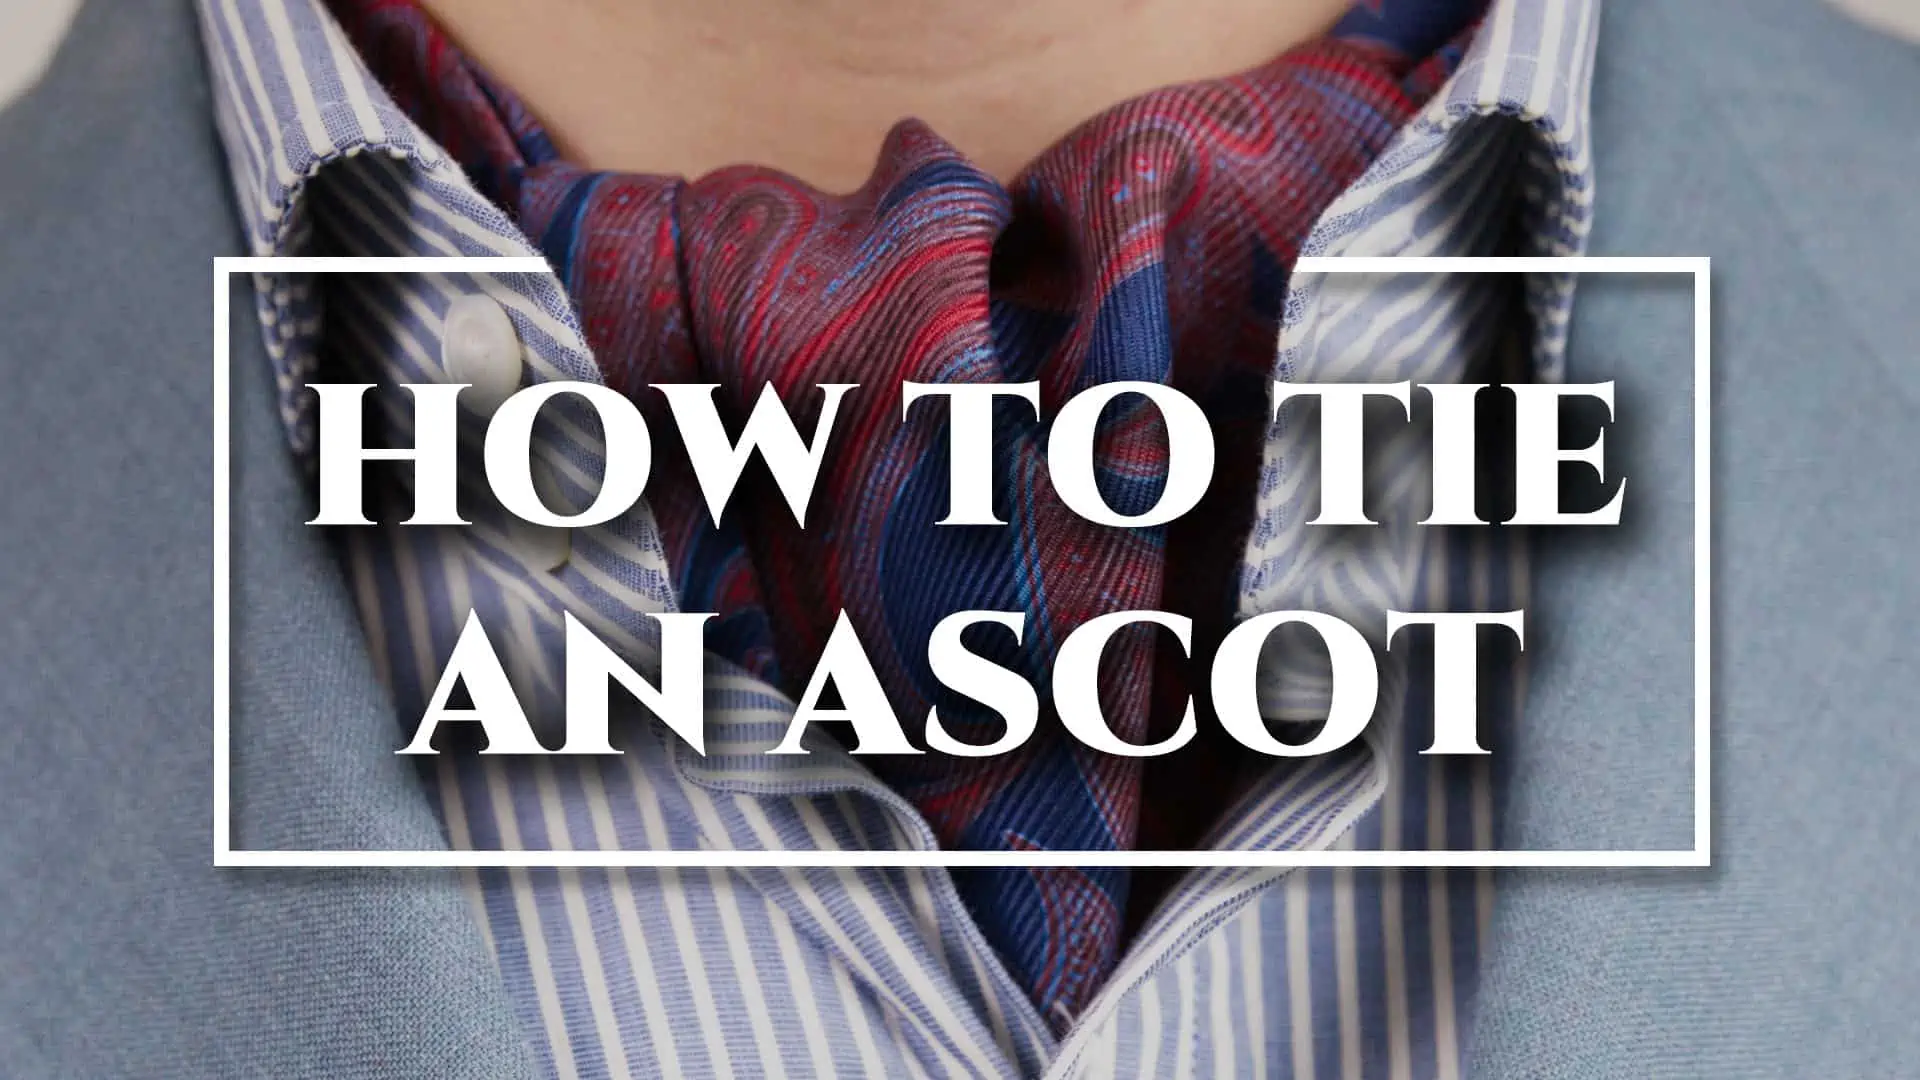 How To Wear an Ascot  Mens fashion suits, Mens outfits, Gentleman style